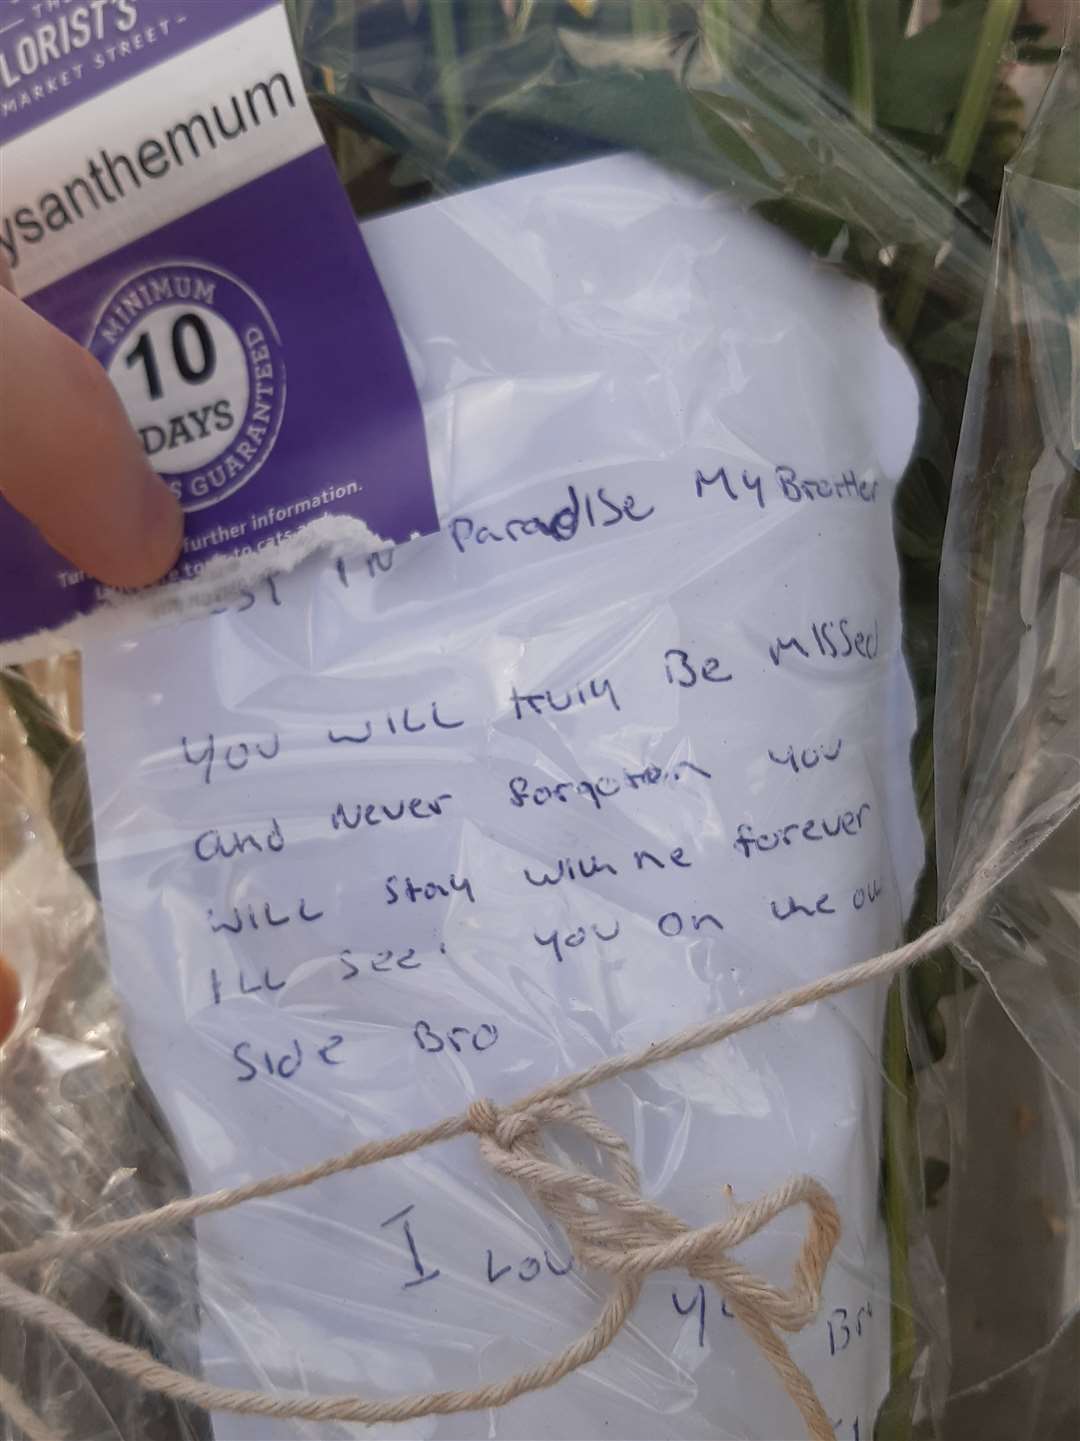 Floral tributes were laid at the scene where Matthew Russell died